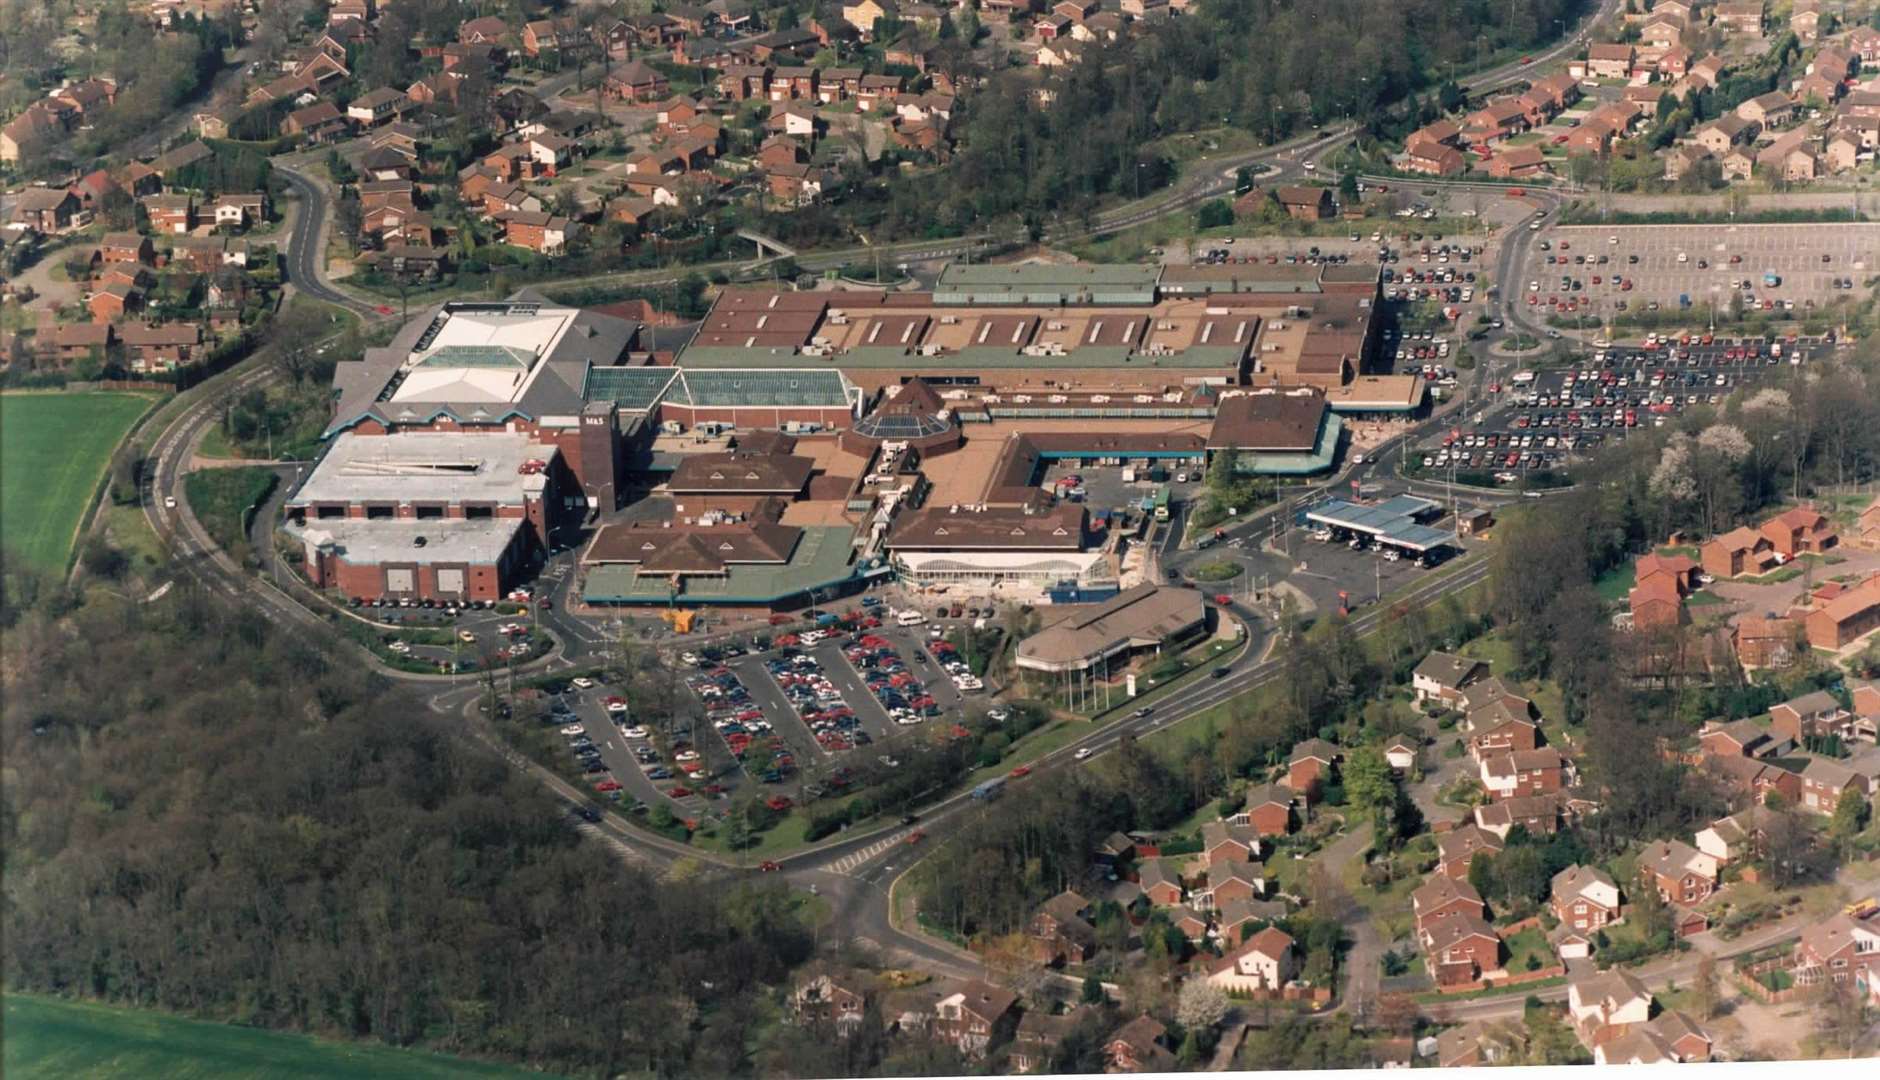 Hempstead Valley Shopping Centre in 1997